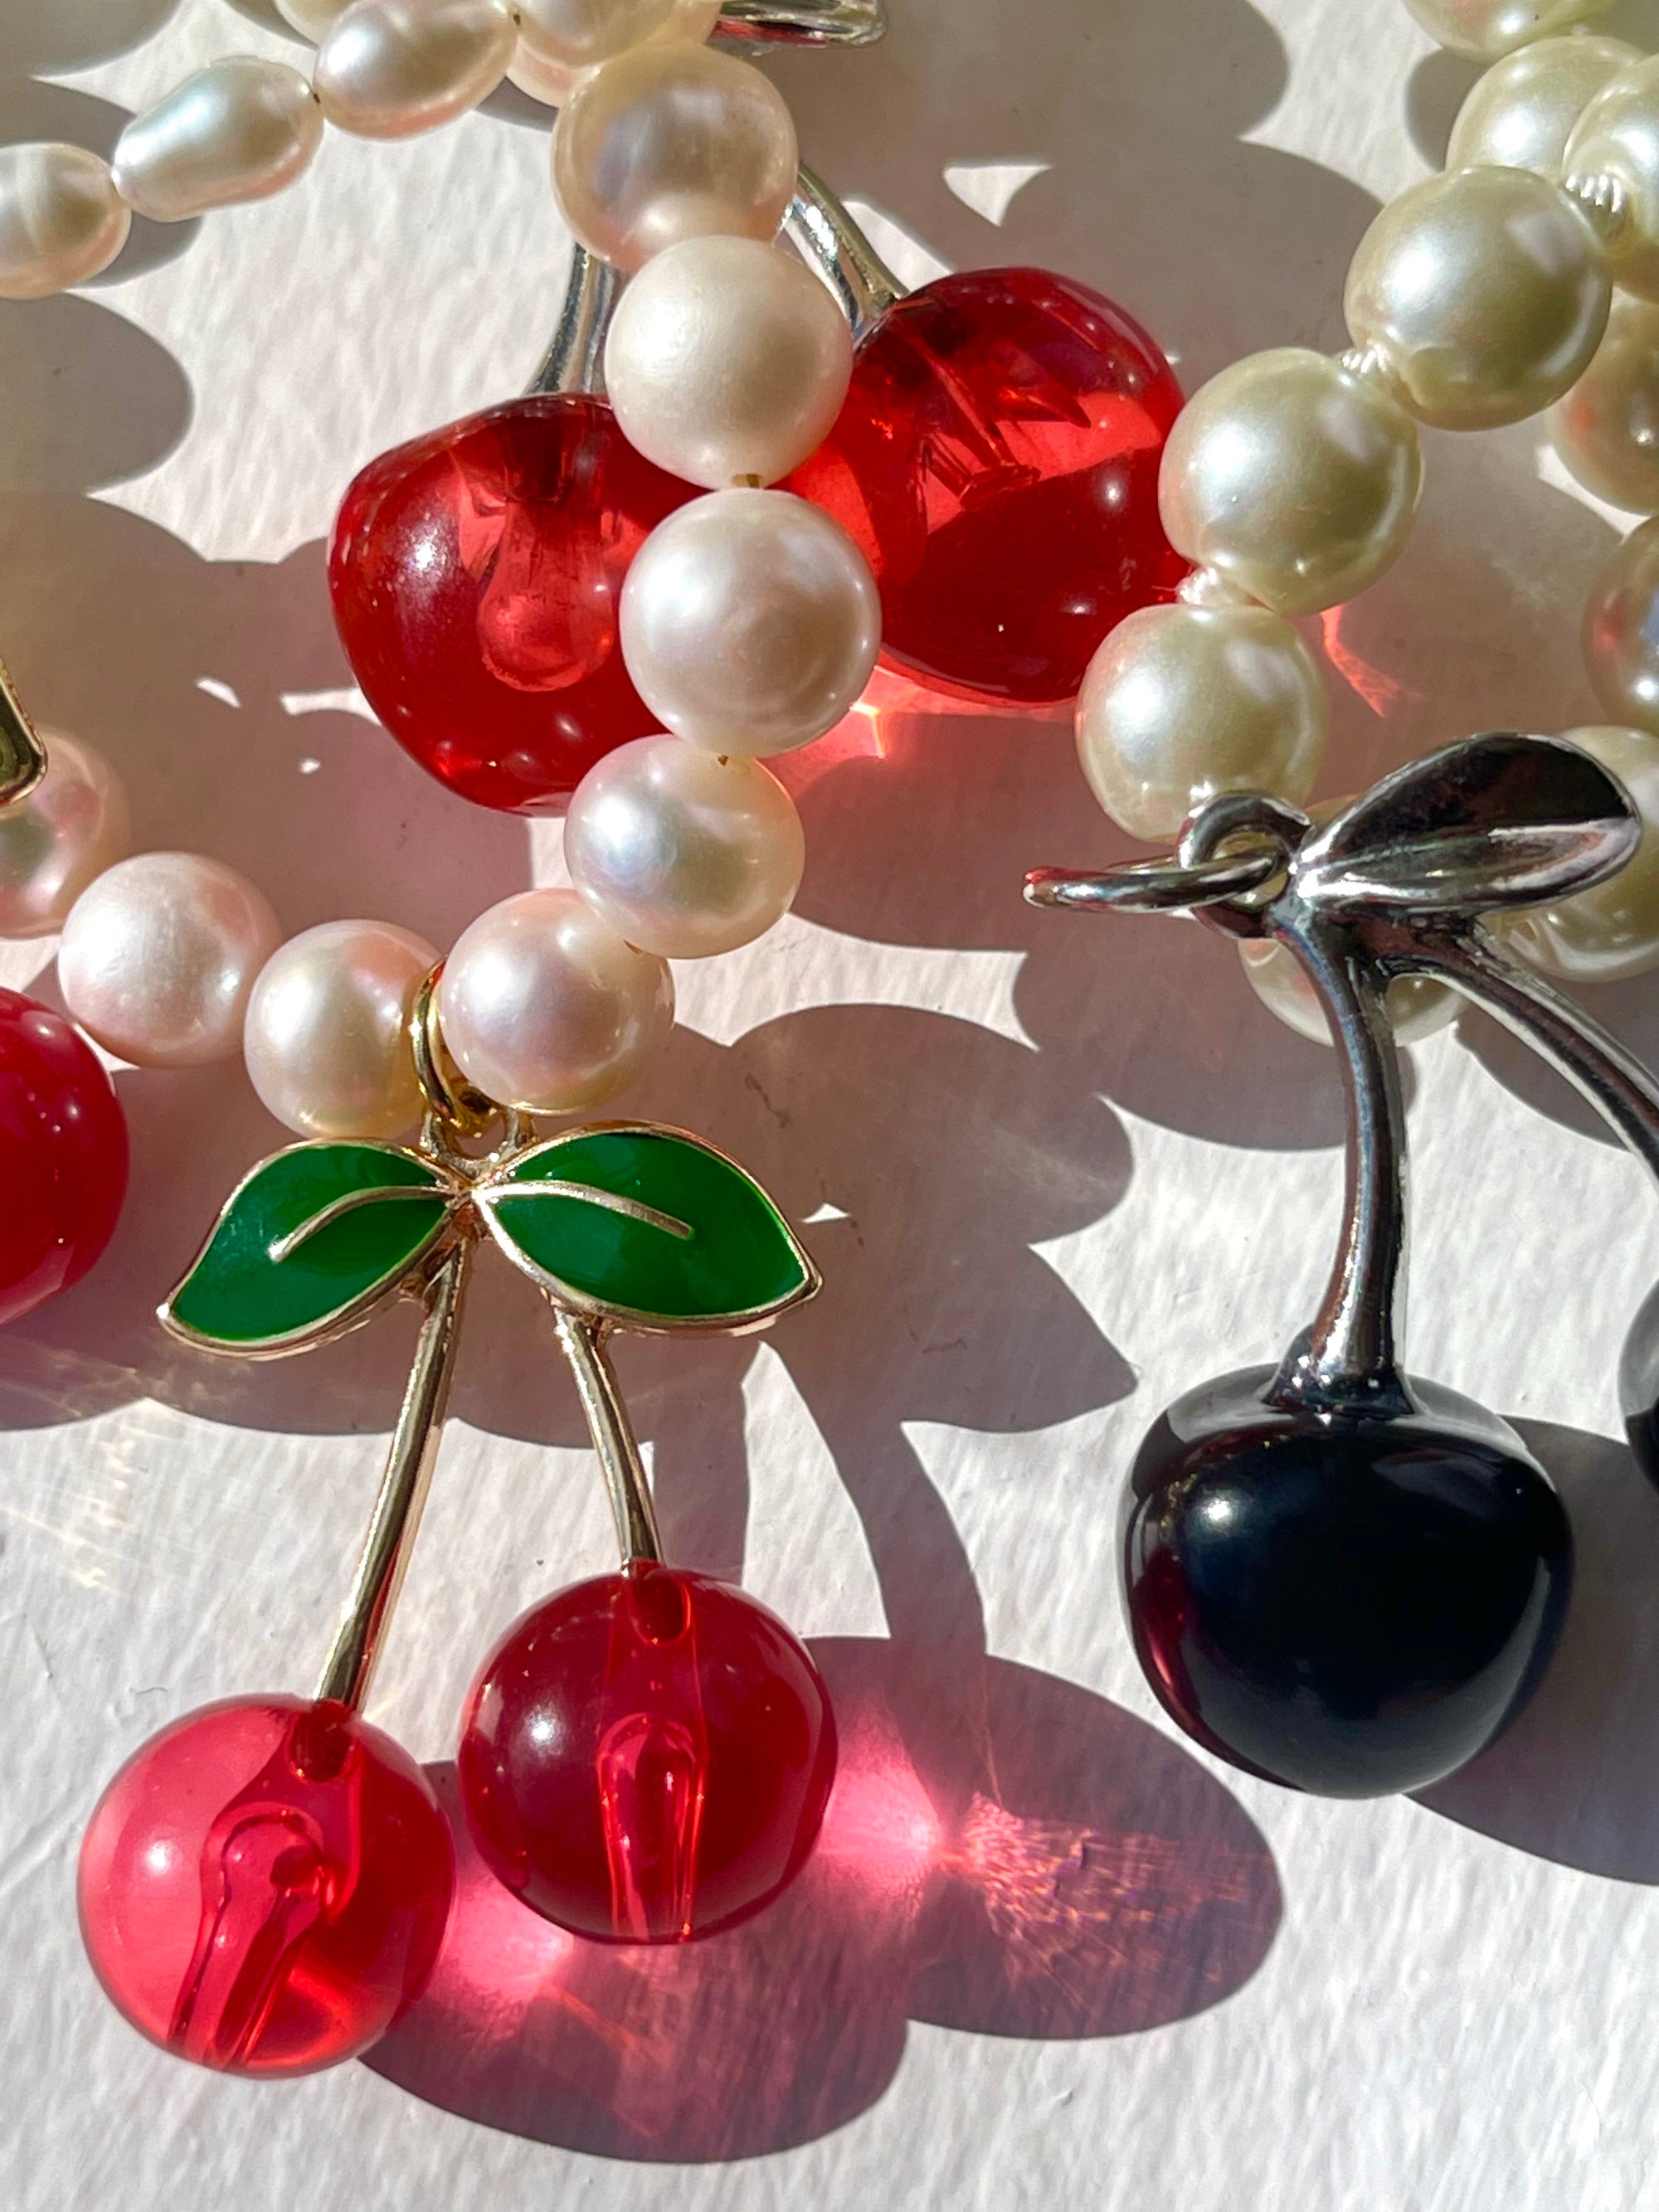 PERFECT CHERRY NECKLACE